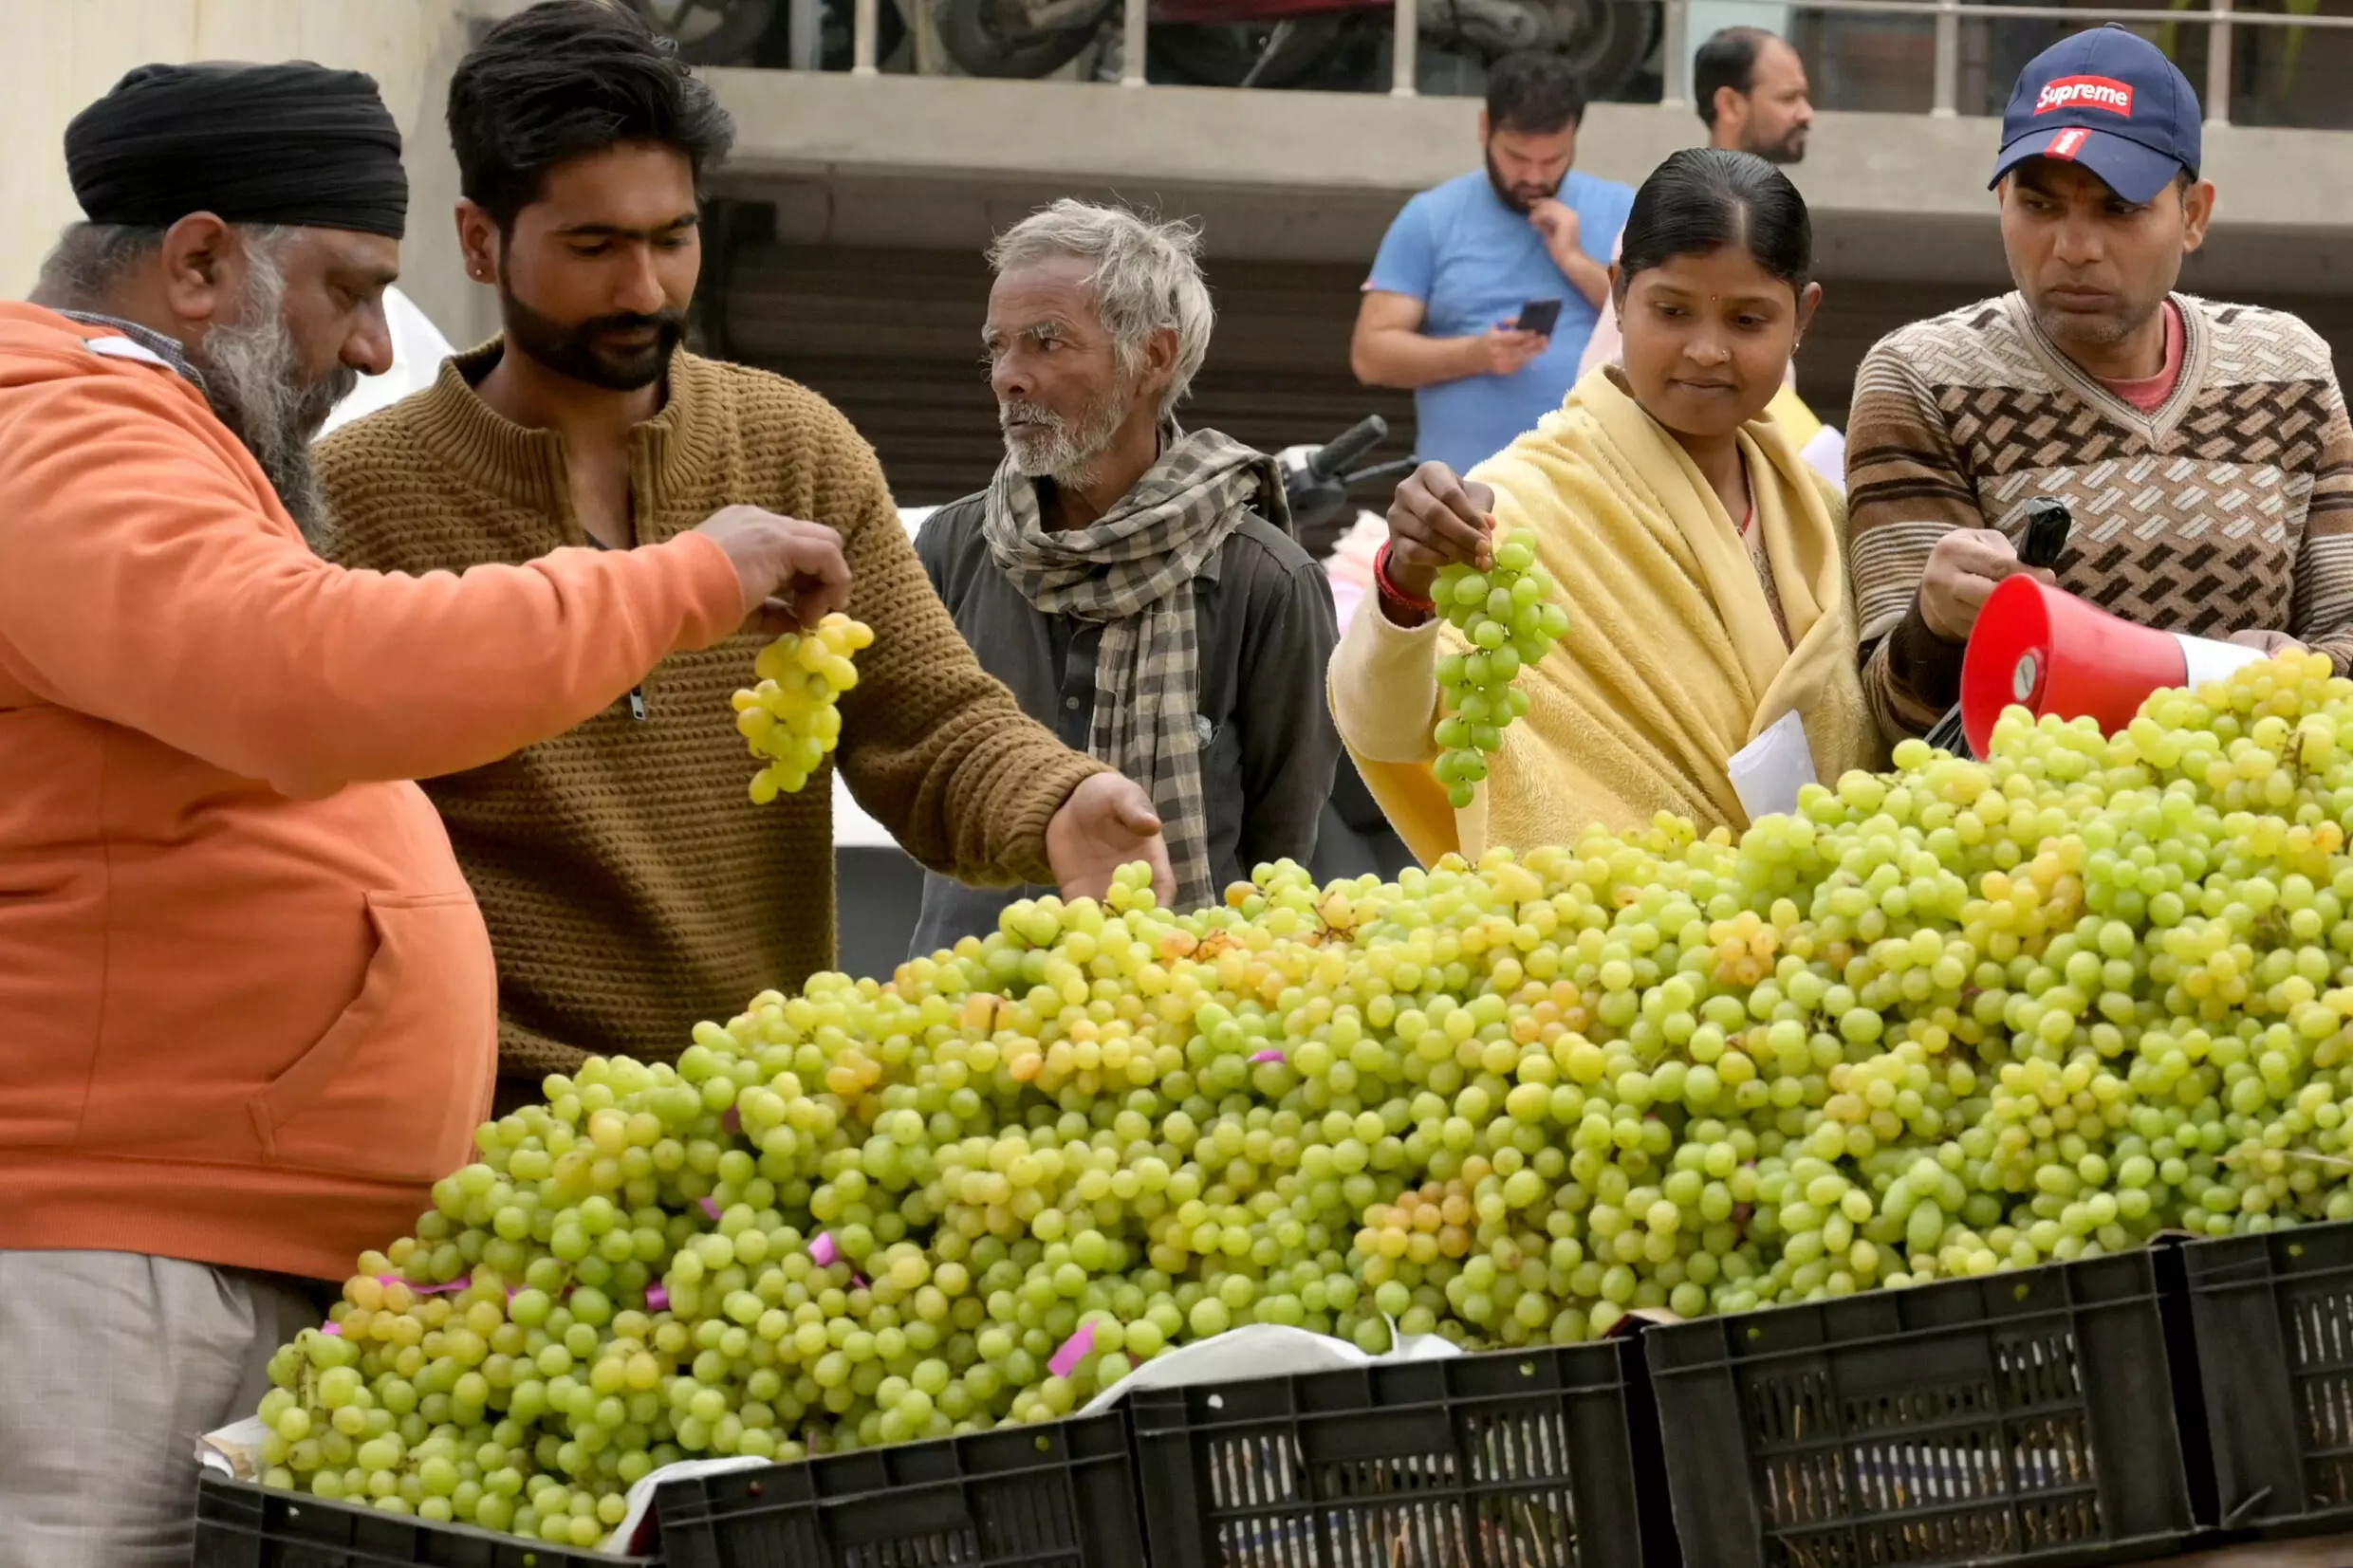 India has been expanding its grape production. A fruit vendor in Amritsar. Photo: AFP